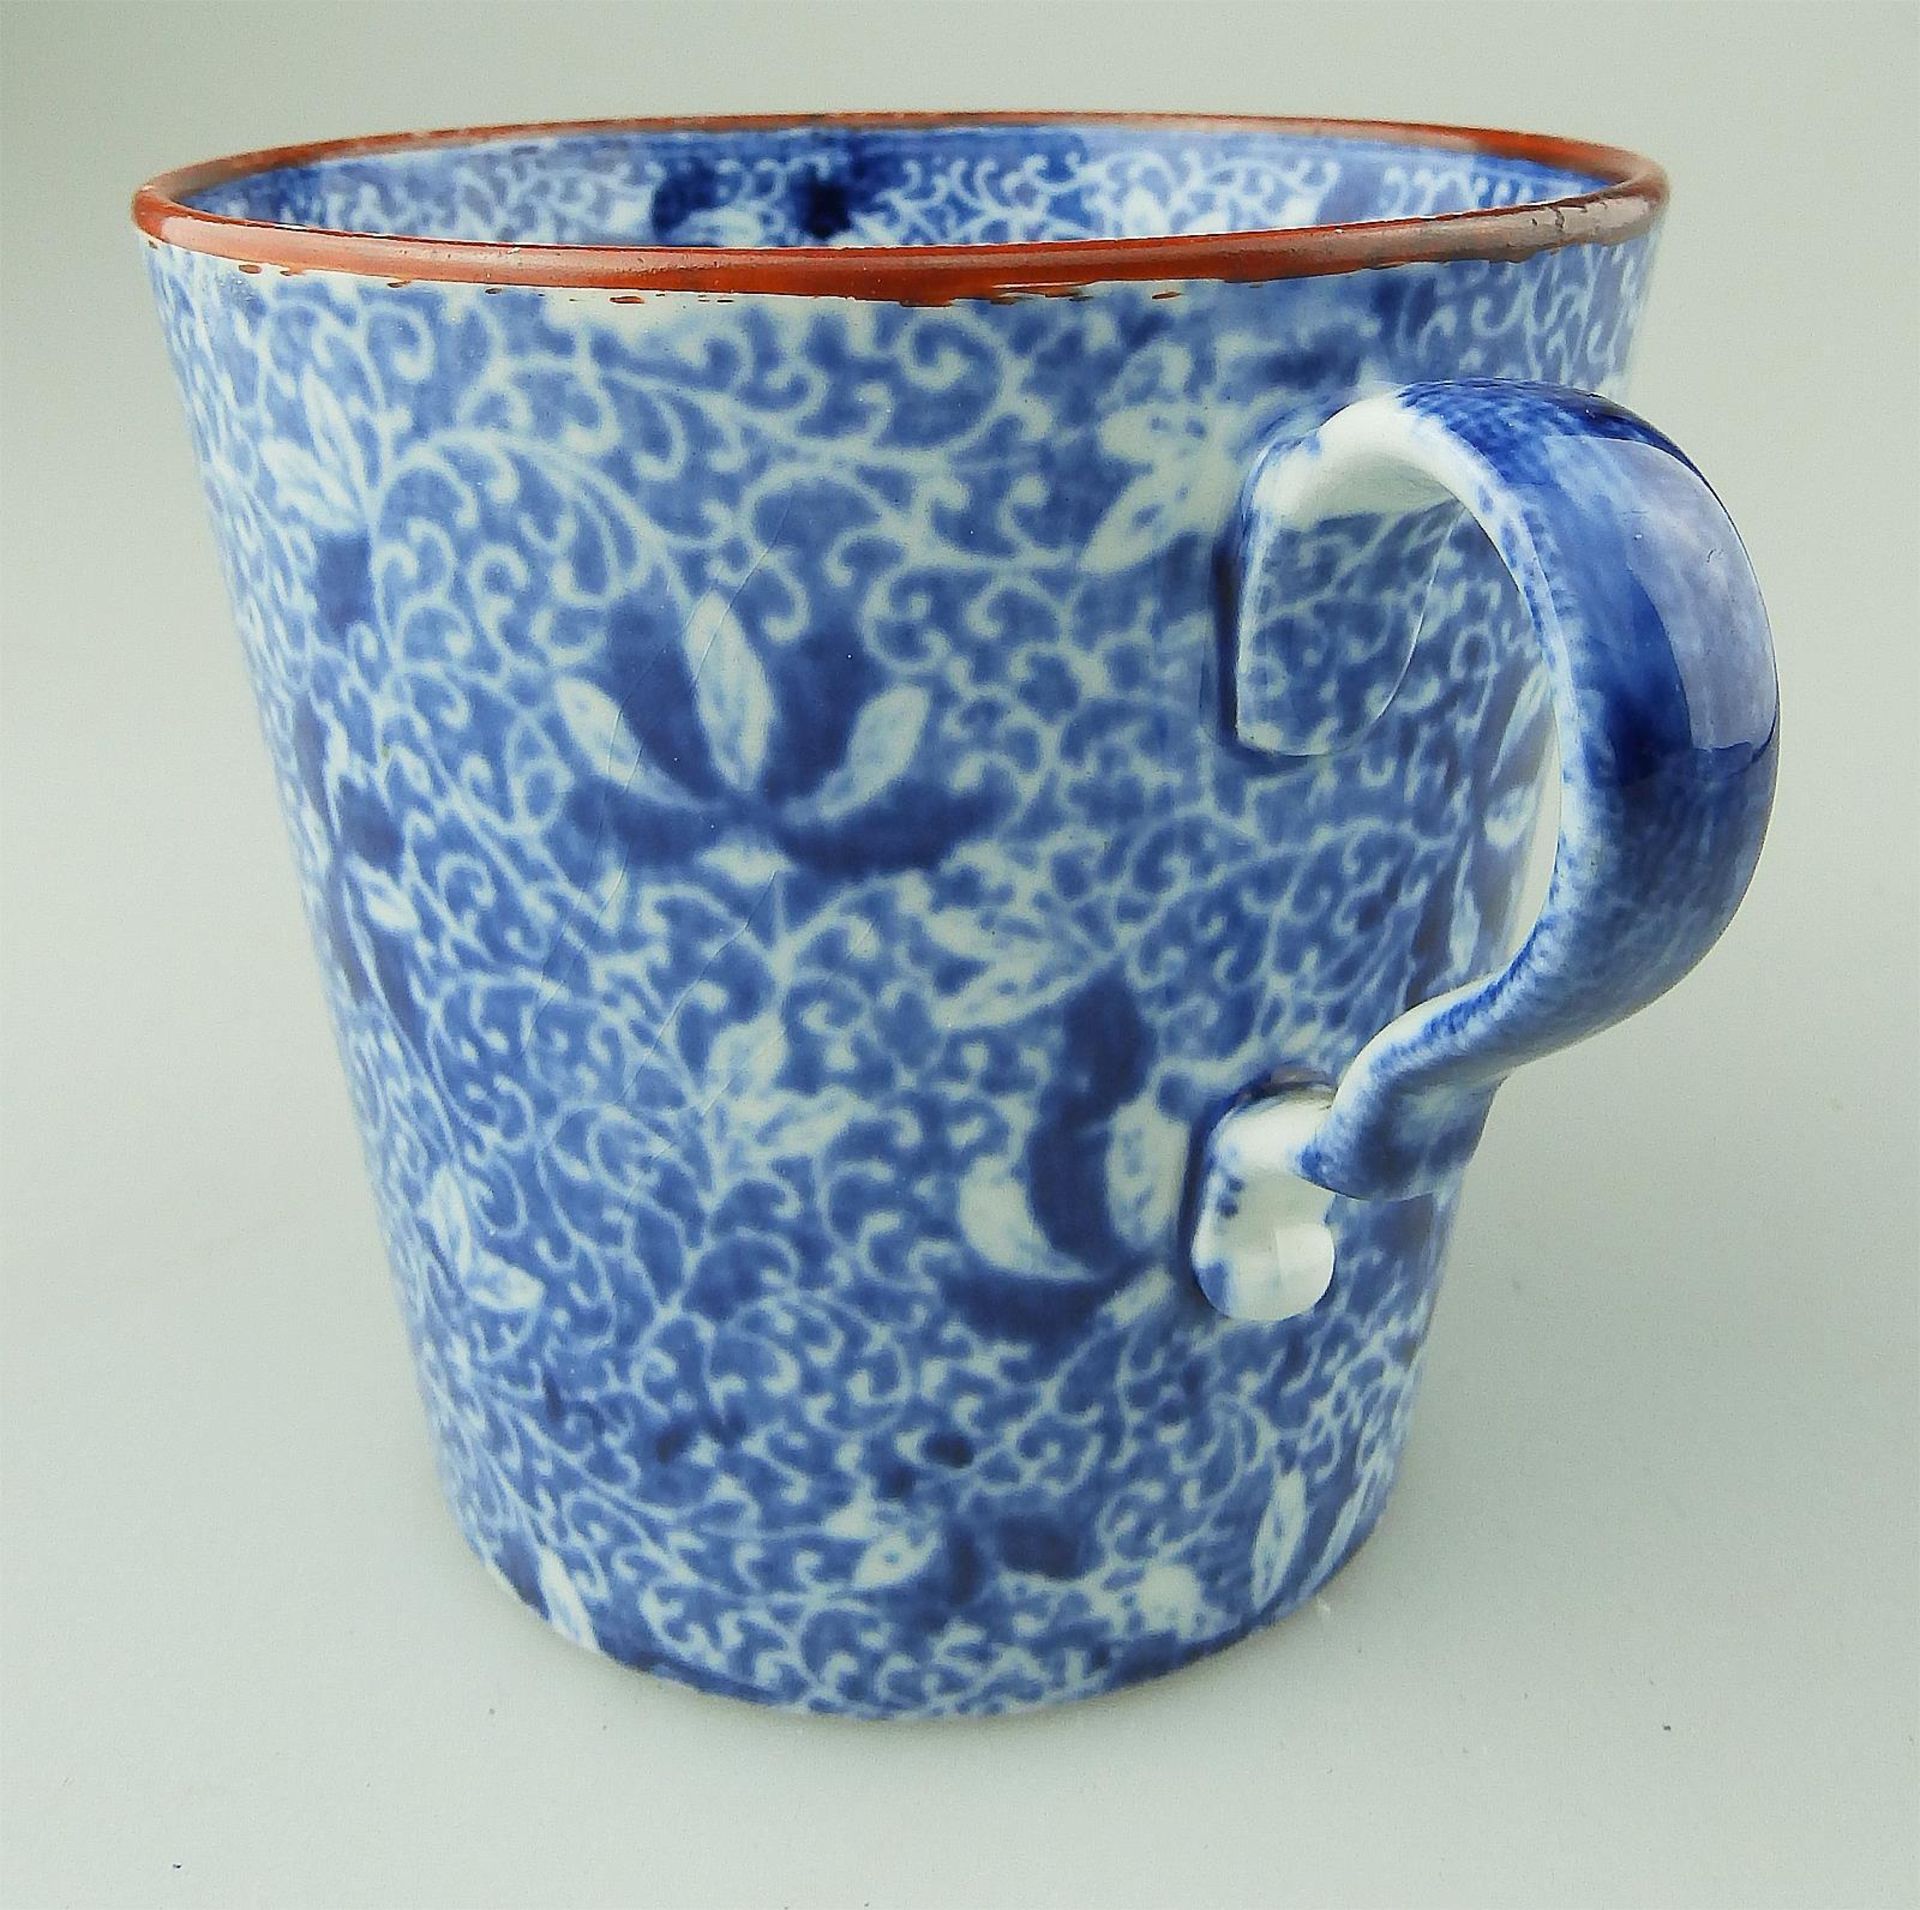 An English pearlware Pottery blue & white transferware Cup & Saucer C.1810 - Image 4 of 8